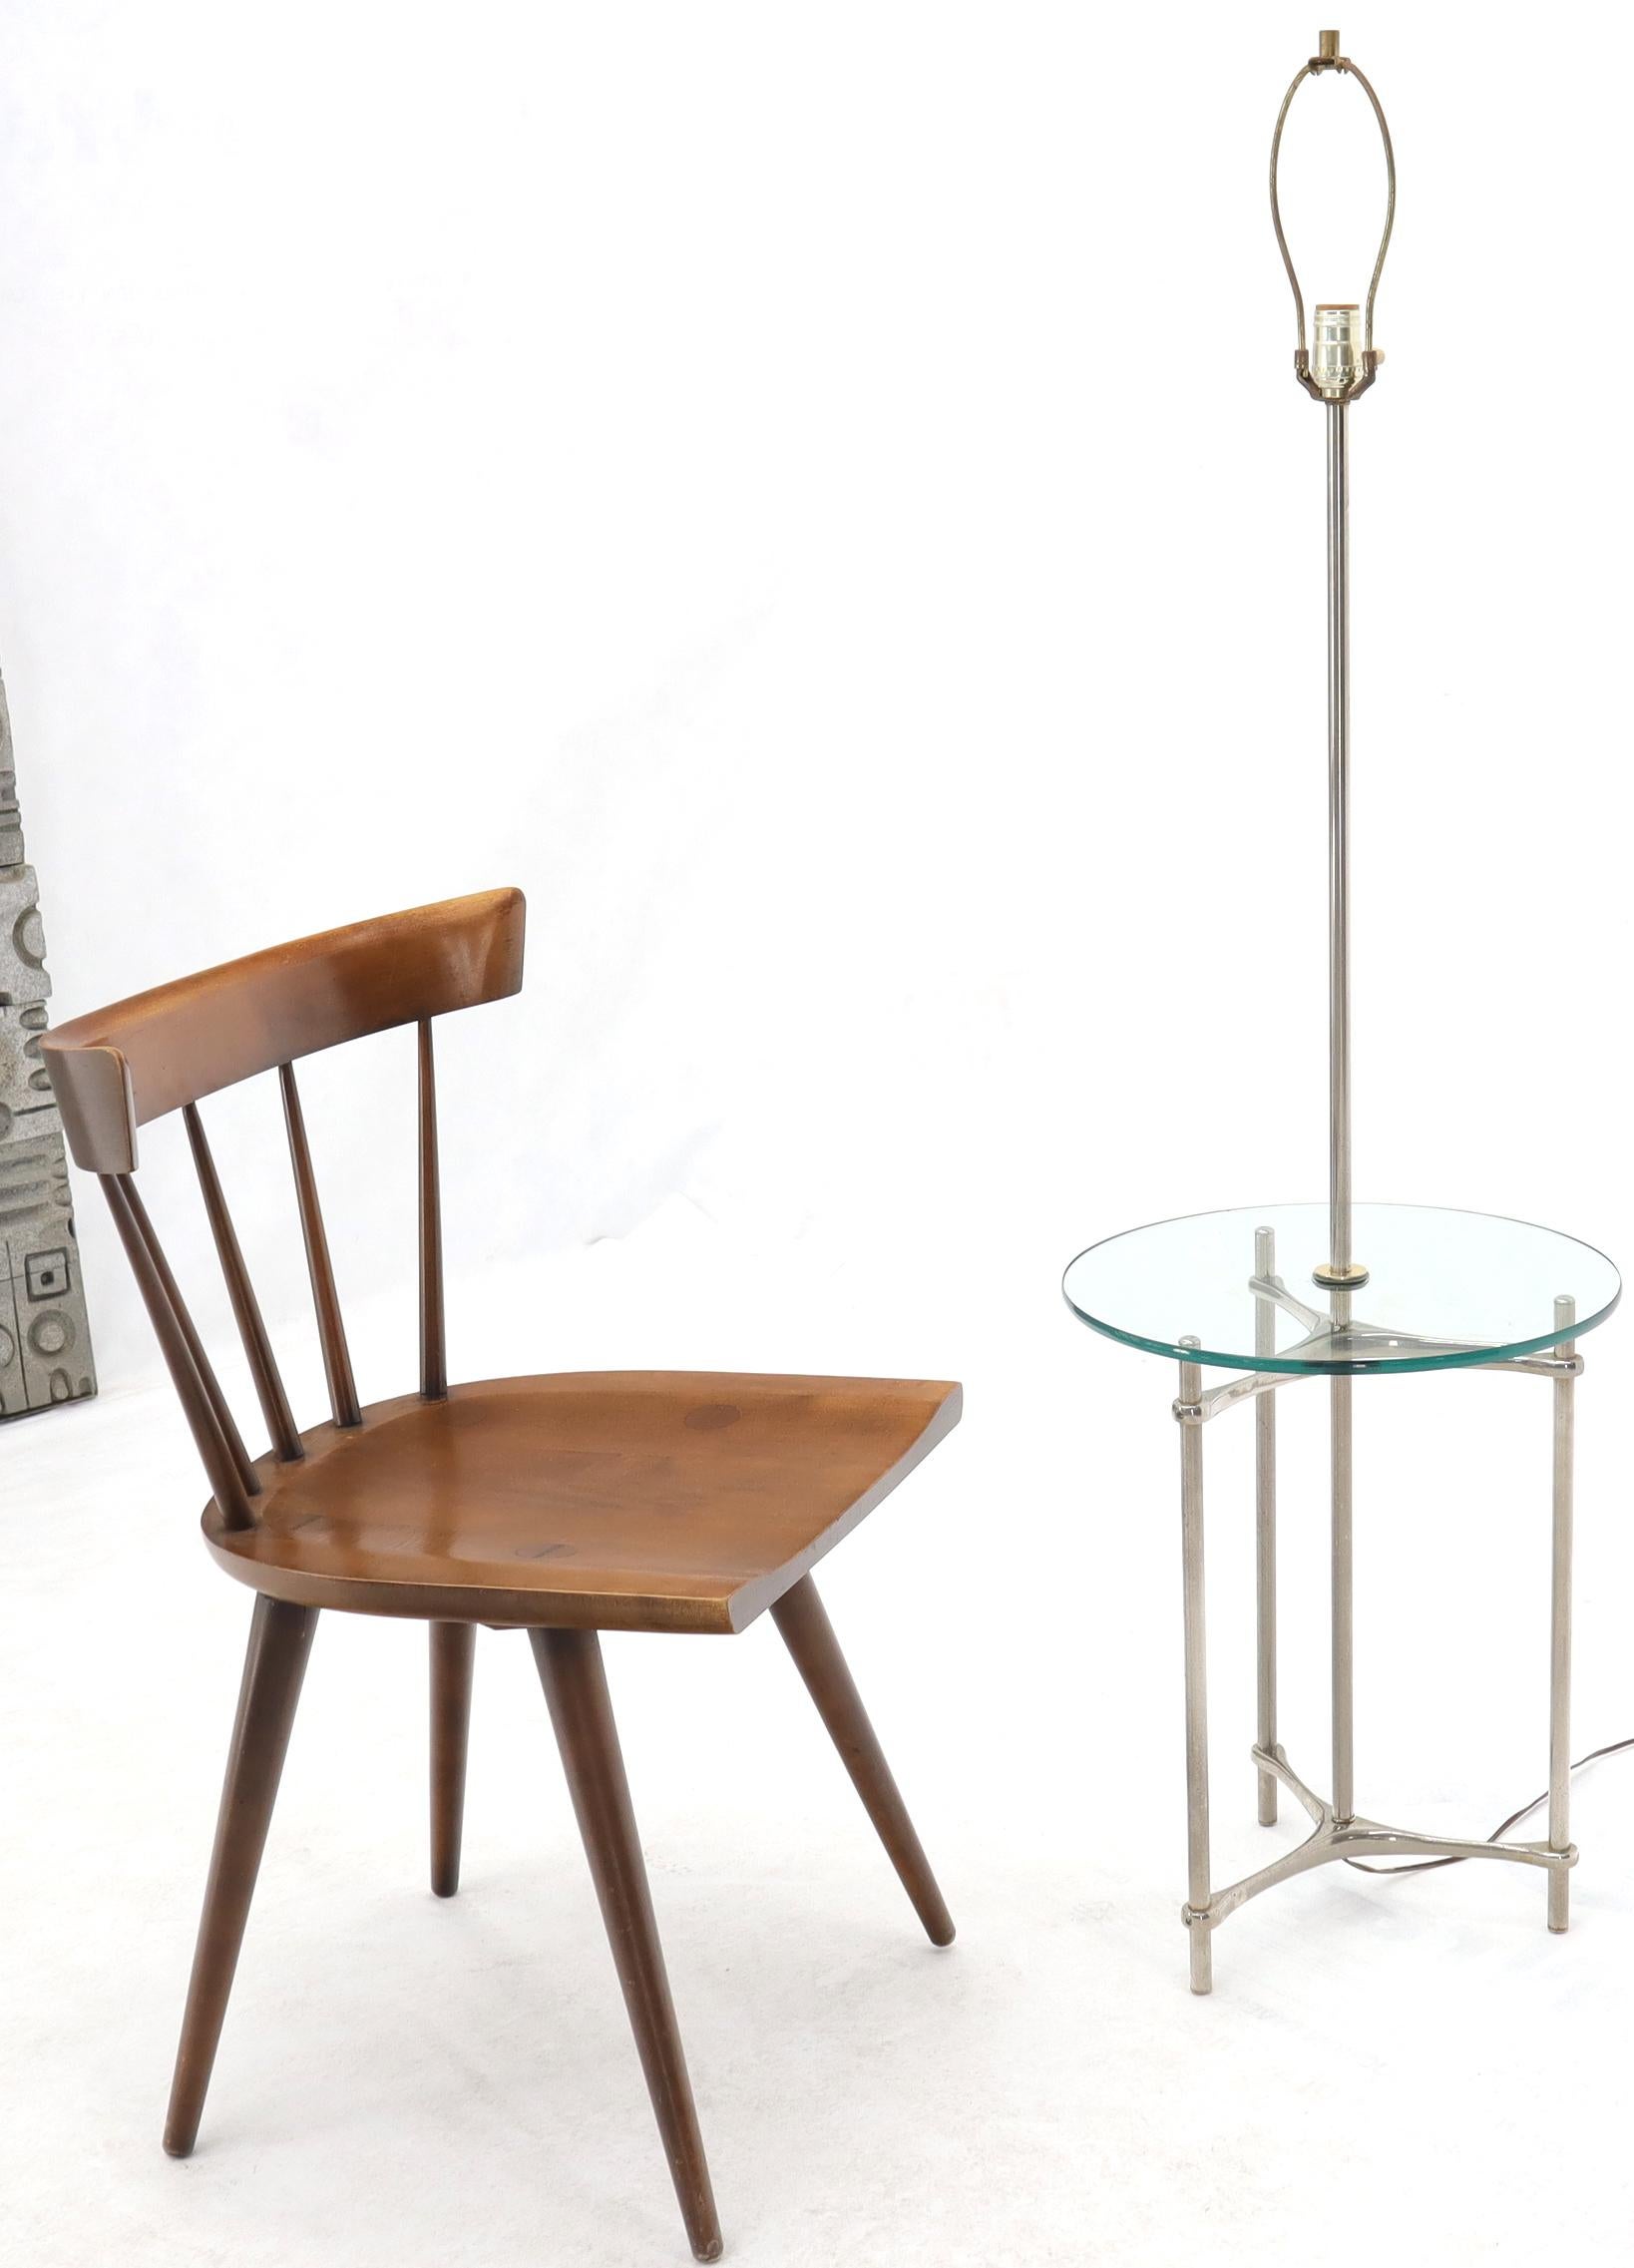 Mid-Century Modern round glass end table floor lamp.